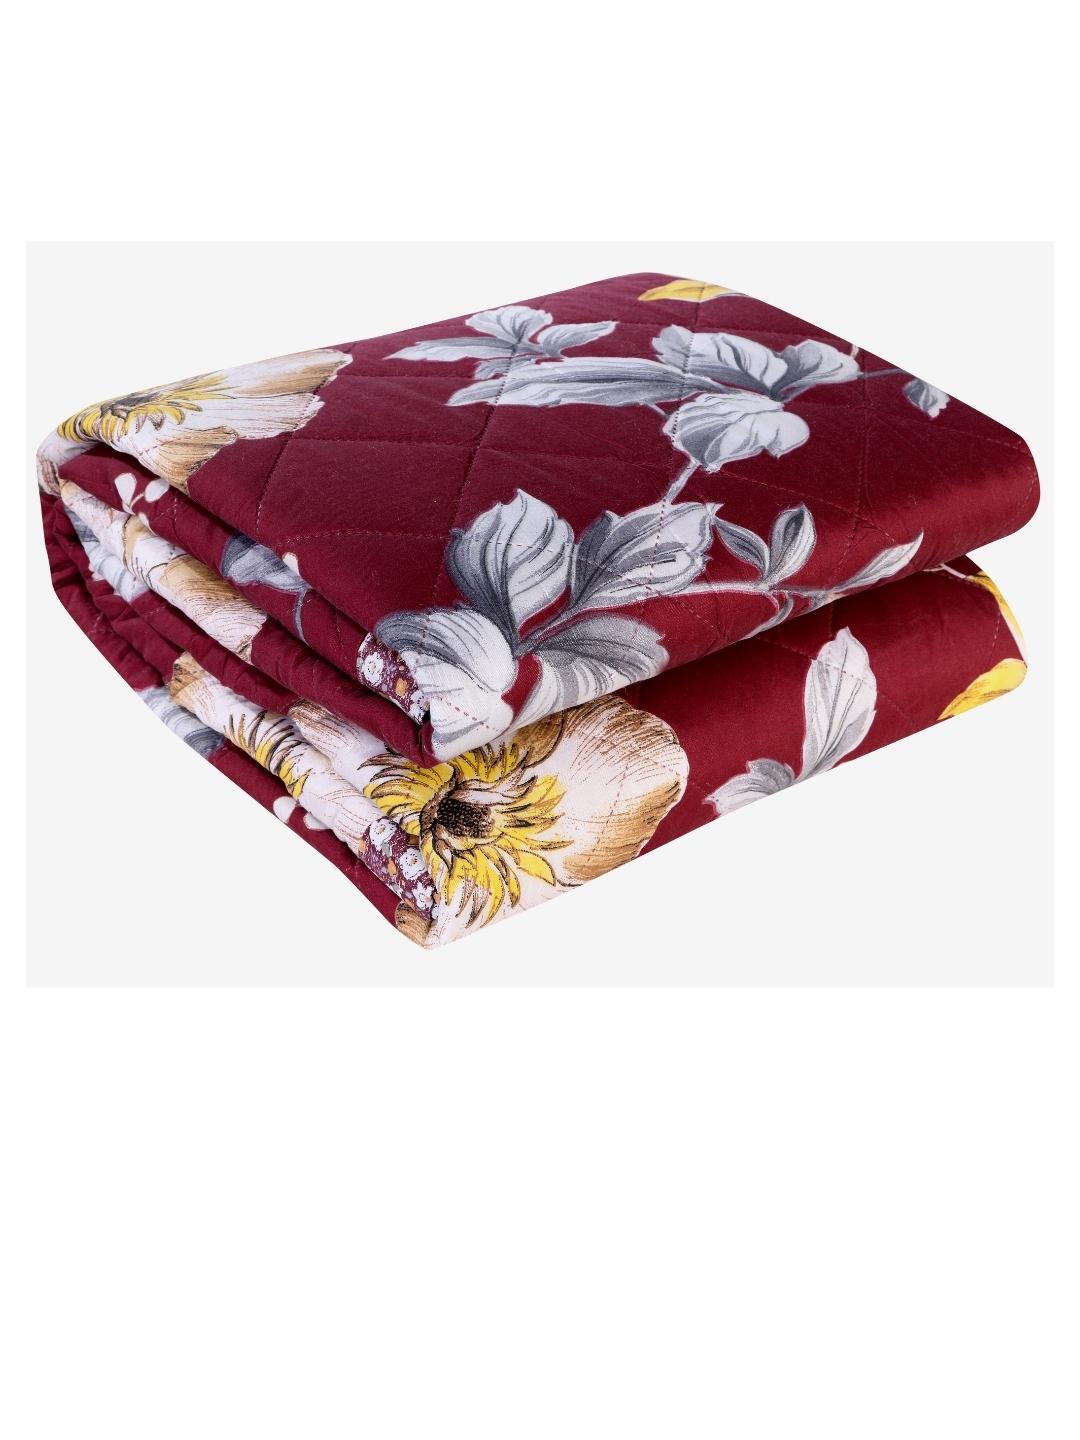 Floral Print Double Bed Light Weight Comforter- Coffee Brown